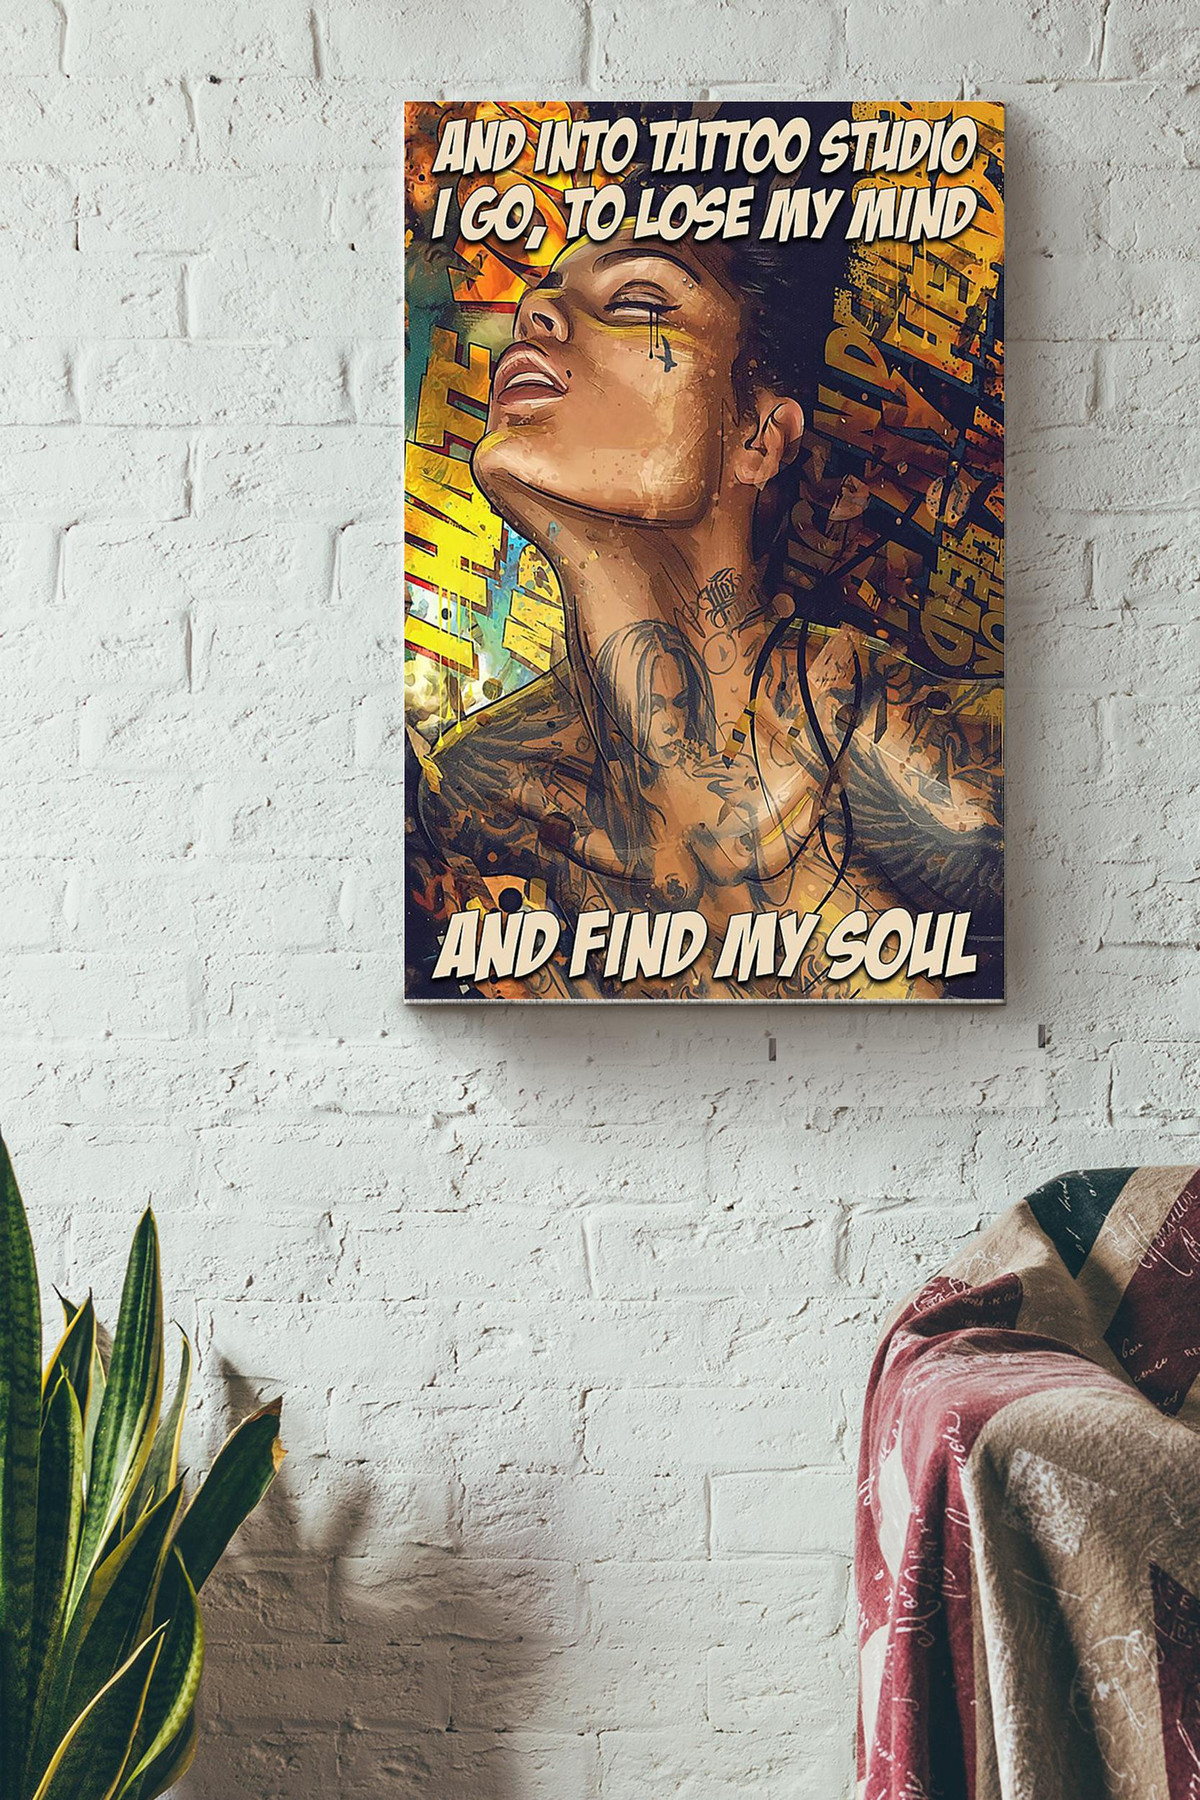 Into Tattoo Studio I Go To Lose My Mind And Find My Soul Canvas Tattoo Art Gift For Tattooed People Yakuza Tattoo Artist Canvas Gallery Painting Wrapped Canvas Framed Prints, Canvas Paintings Wrapped Canvas 8x10